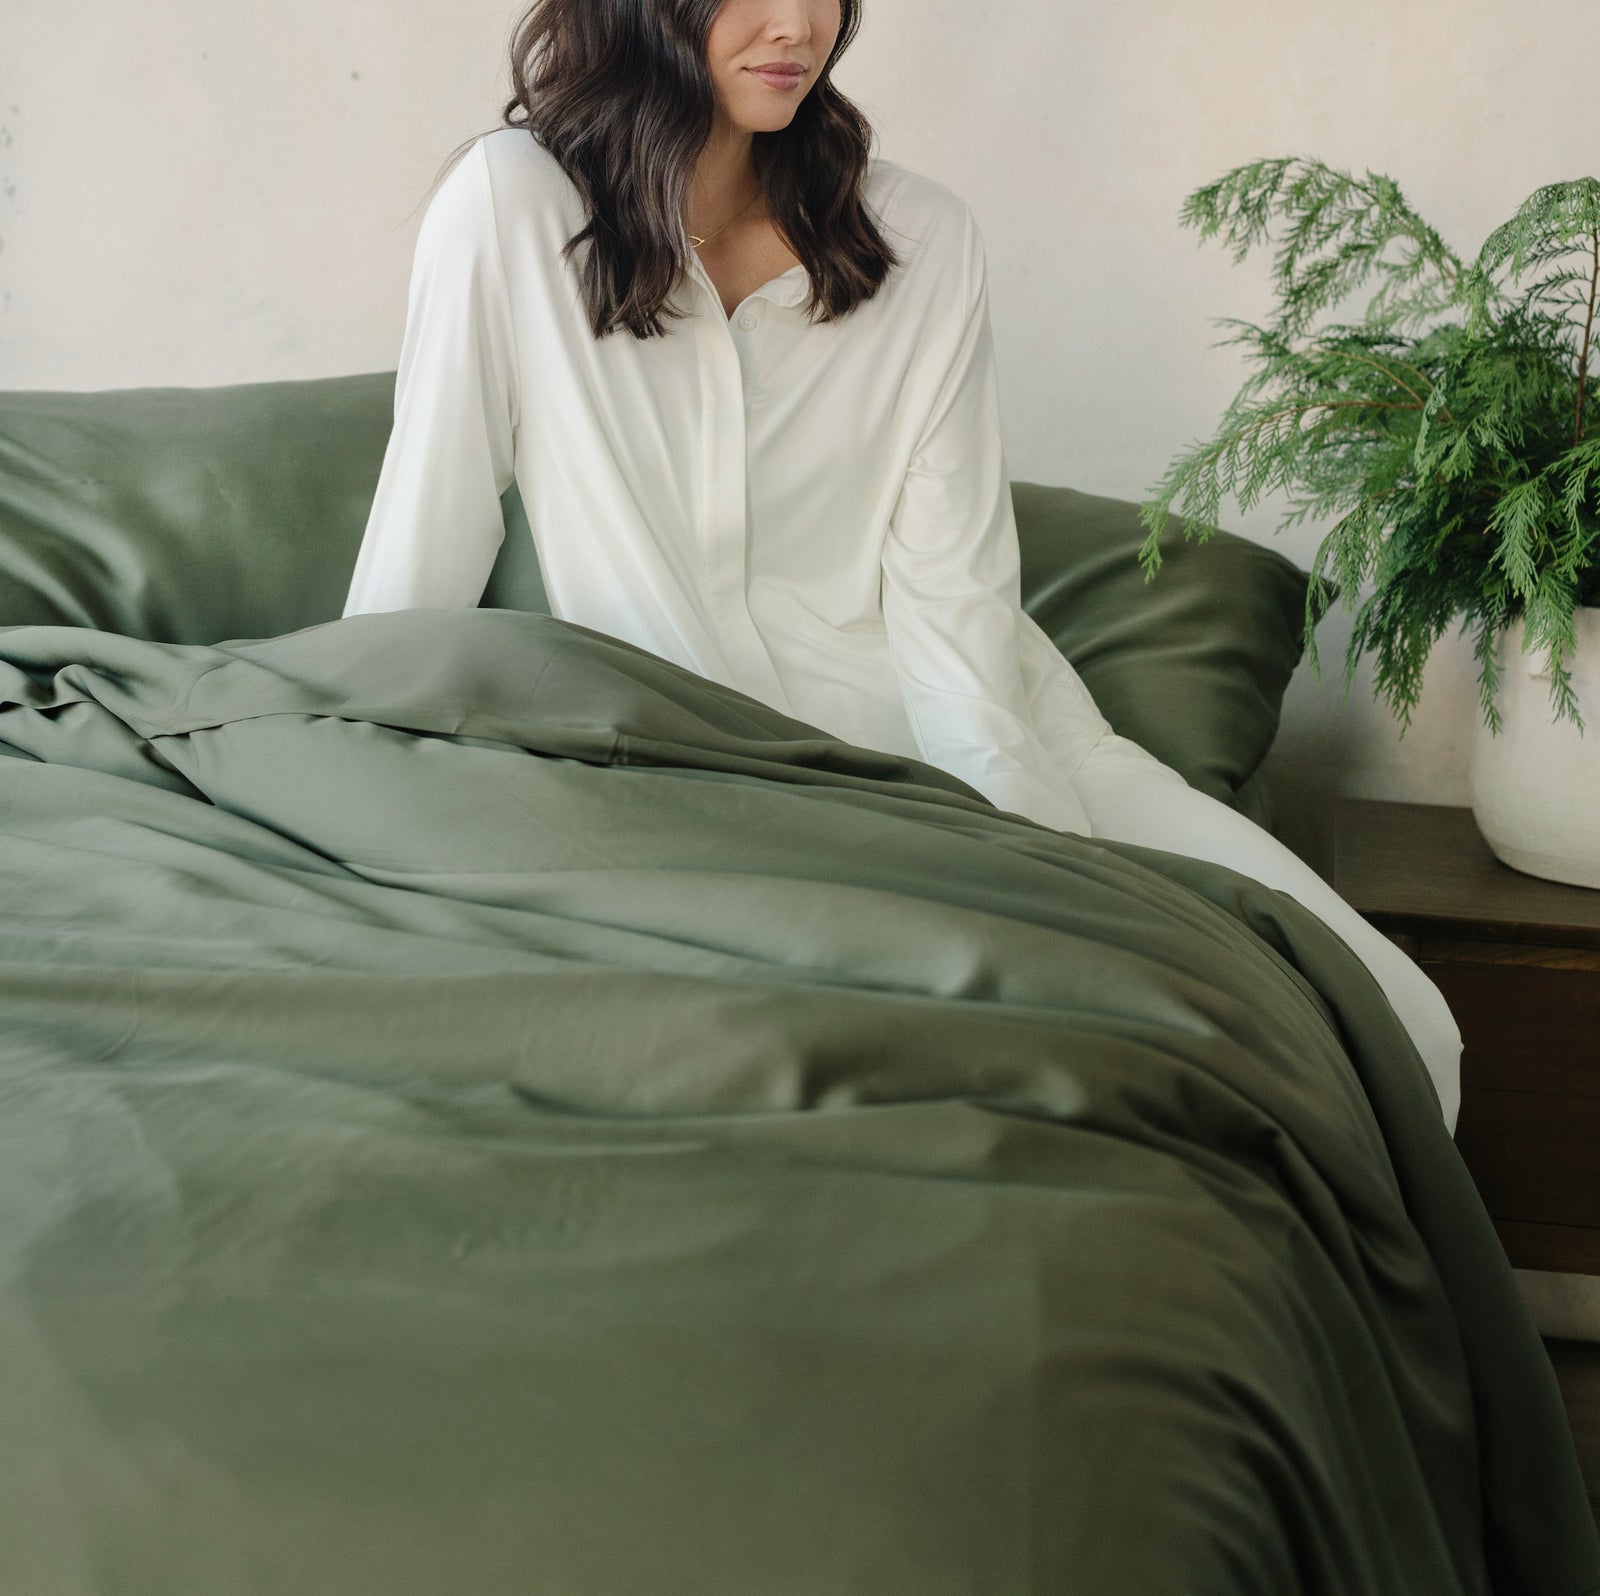 Woman sitting on bed with olive bedding 